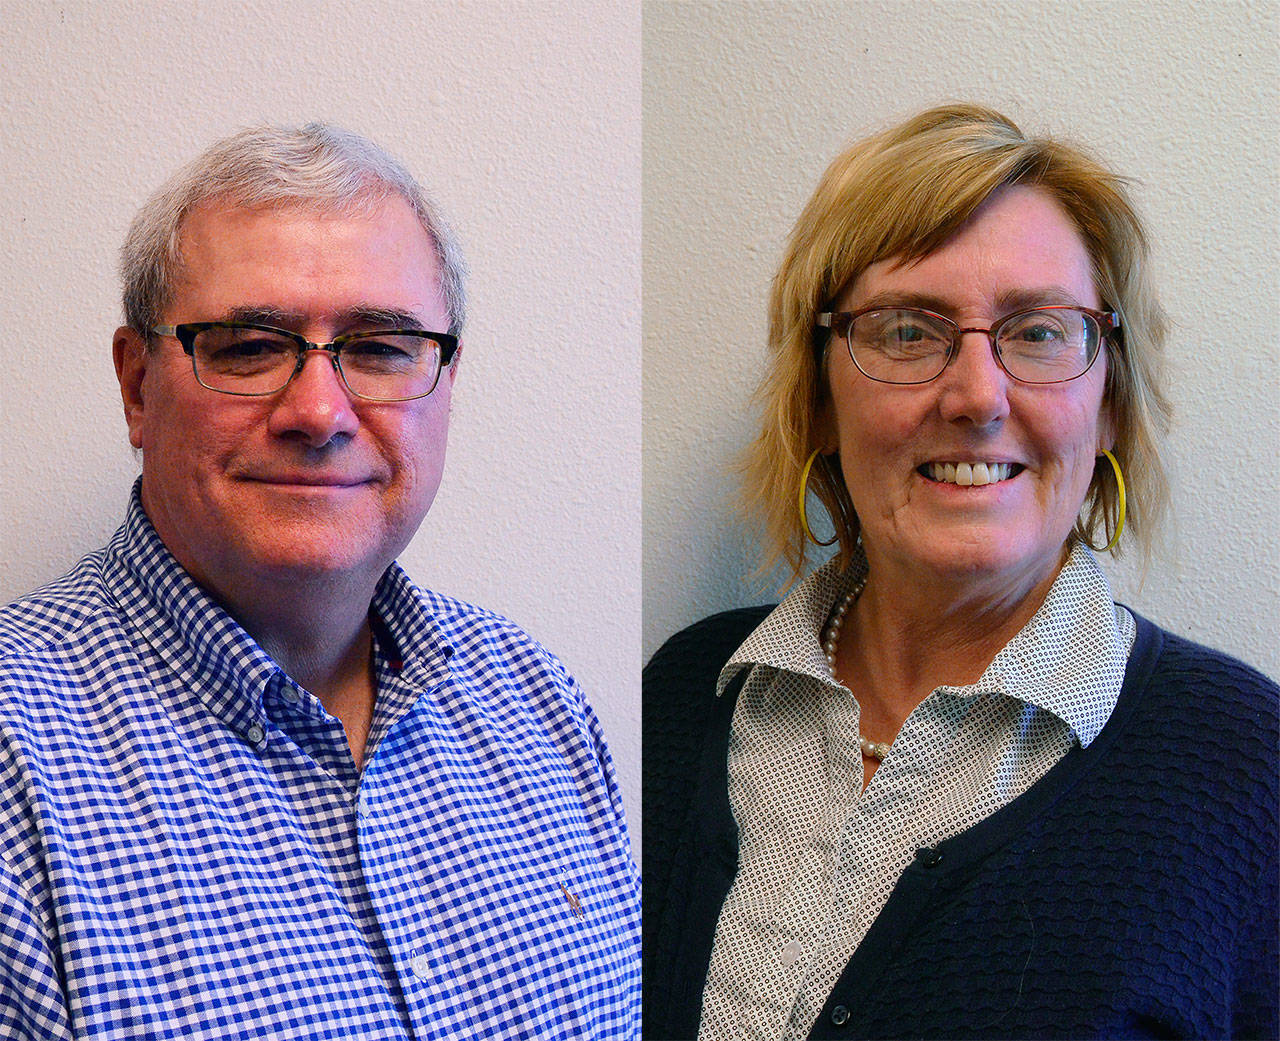 Justin Burnett / The Record — Burt Beusch (left) and Christy Korrow (right) are running for position 1 on the Langley City Council.